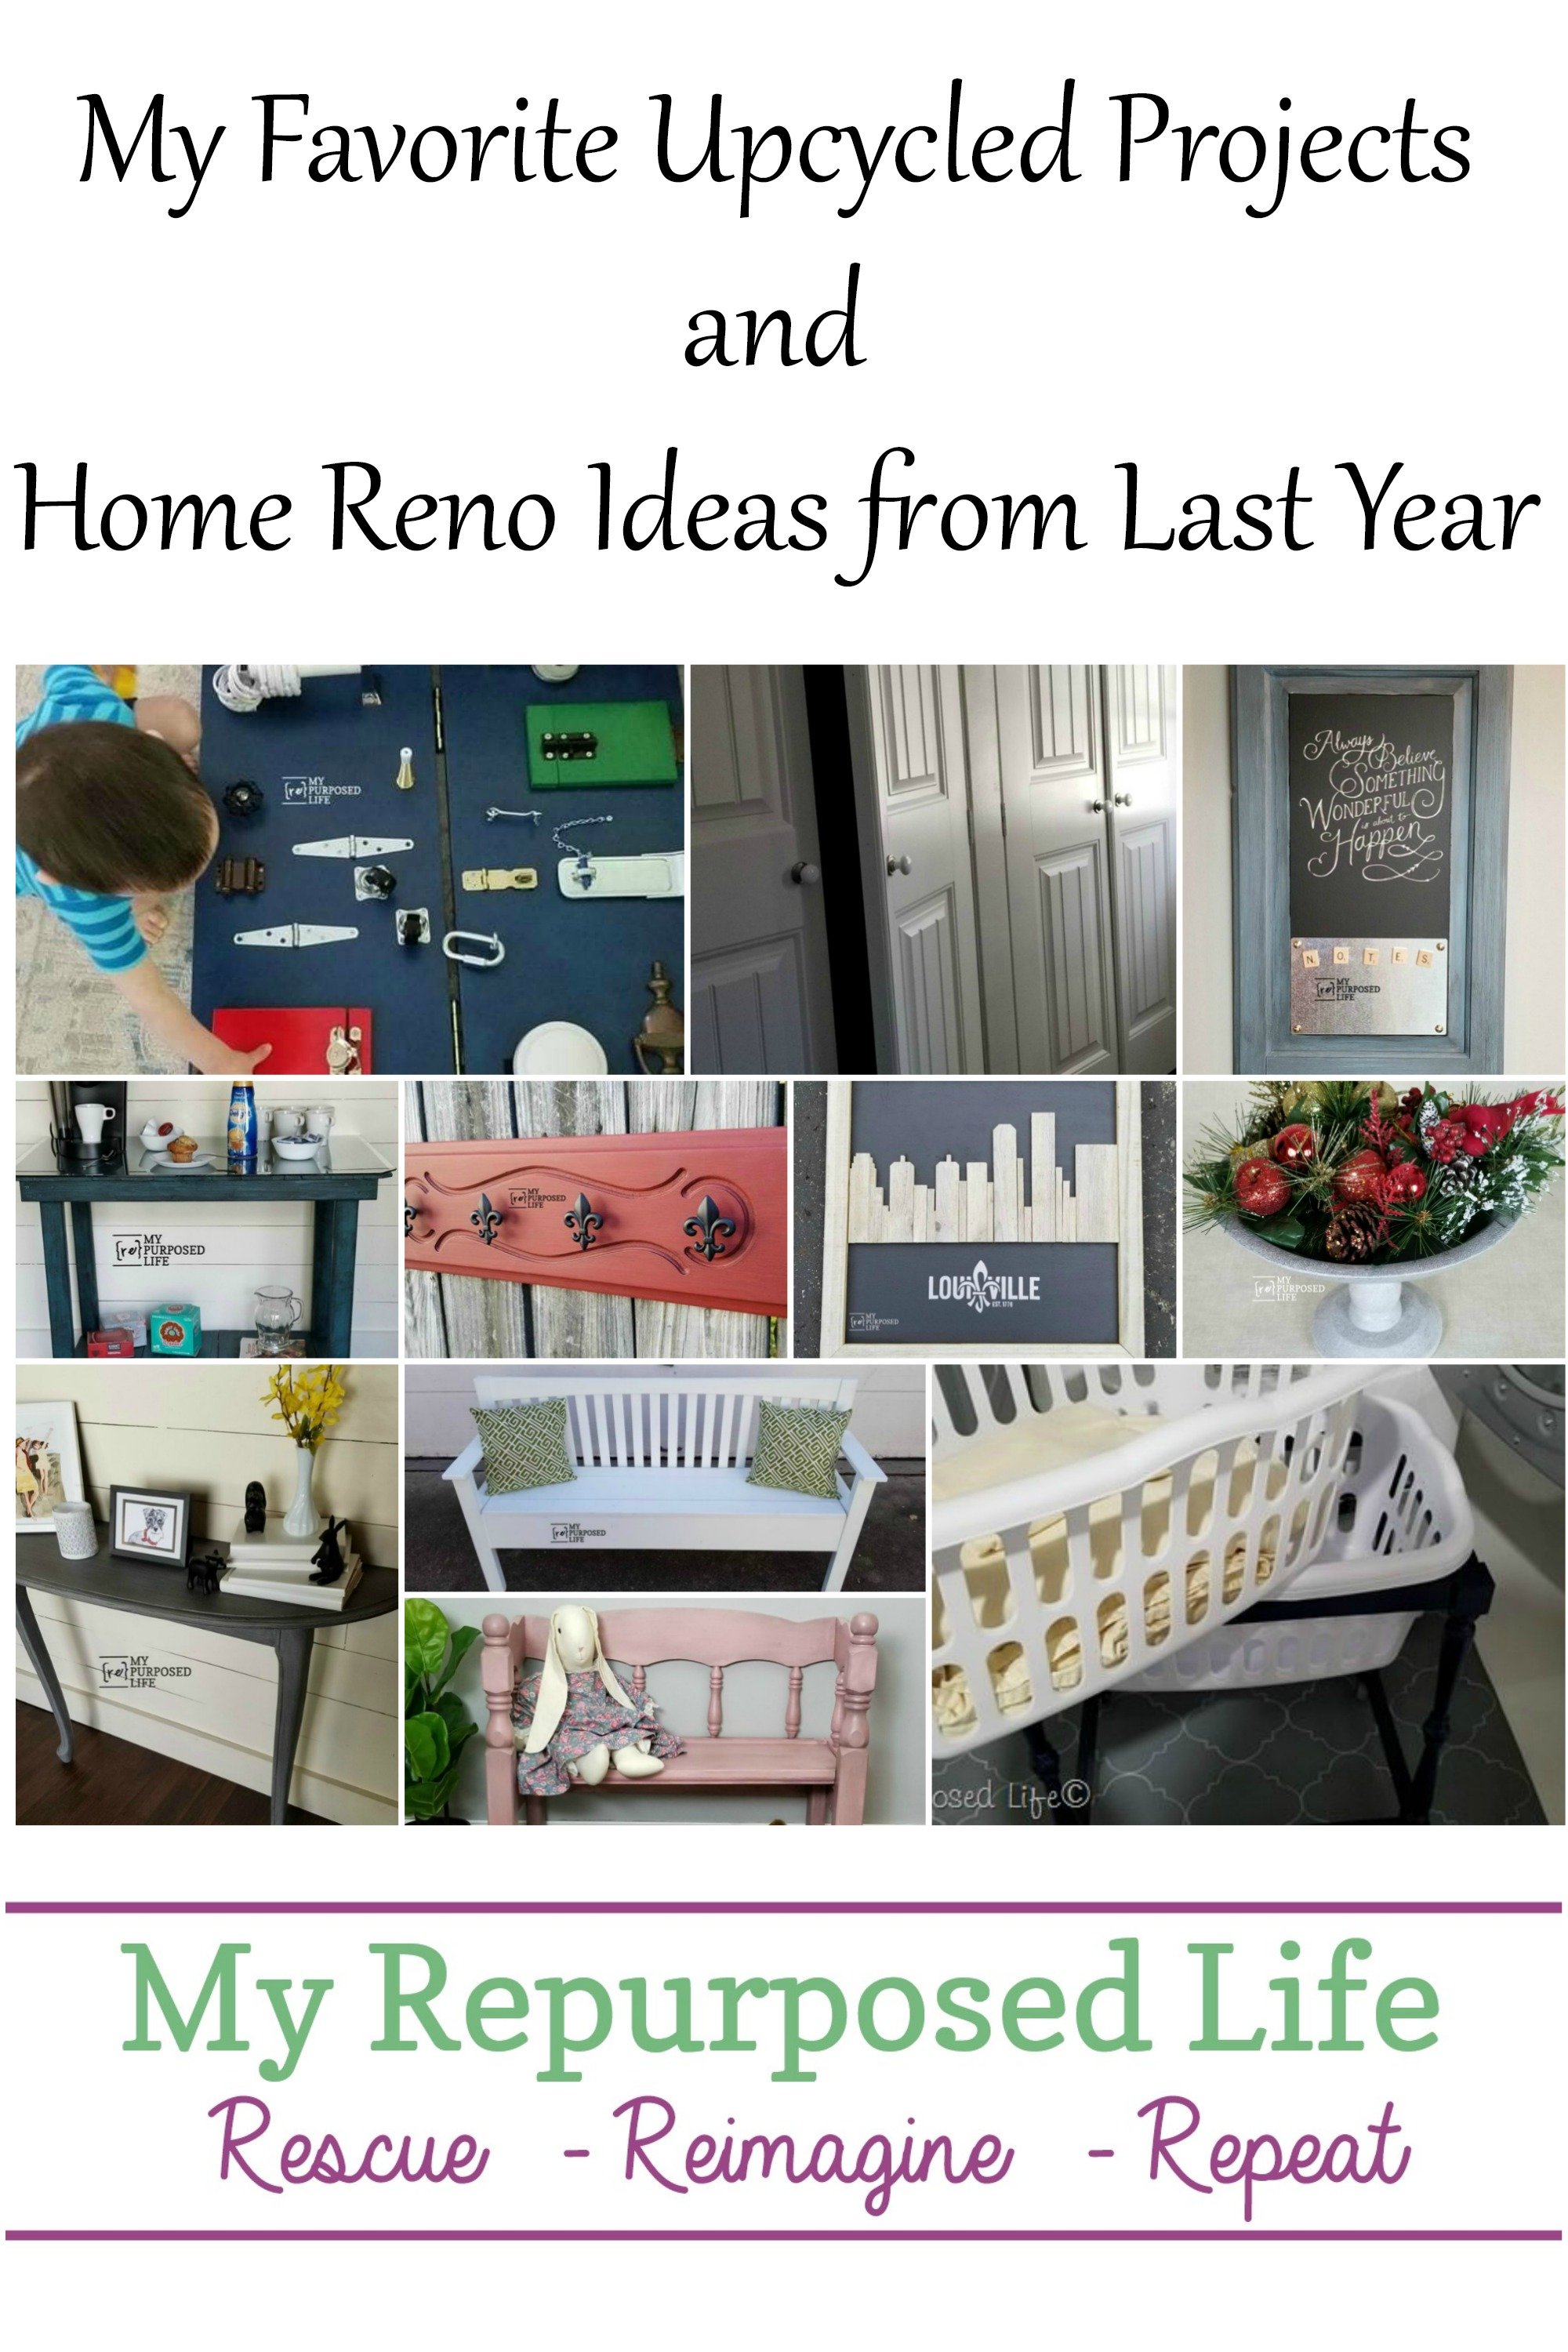 Looking back at favorite upcycled projects and home reno ideas. Whether you're a beginner or experienced, there's something for everyone. What will you make? #MyRepurposedLife #repurposed #upcycle #projects #homereno via @repurposedlife